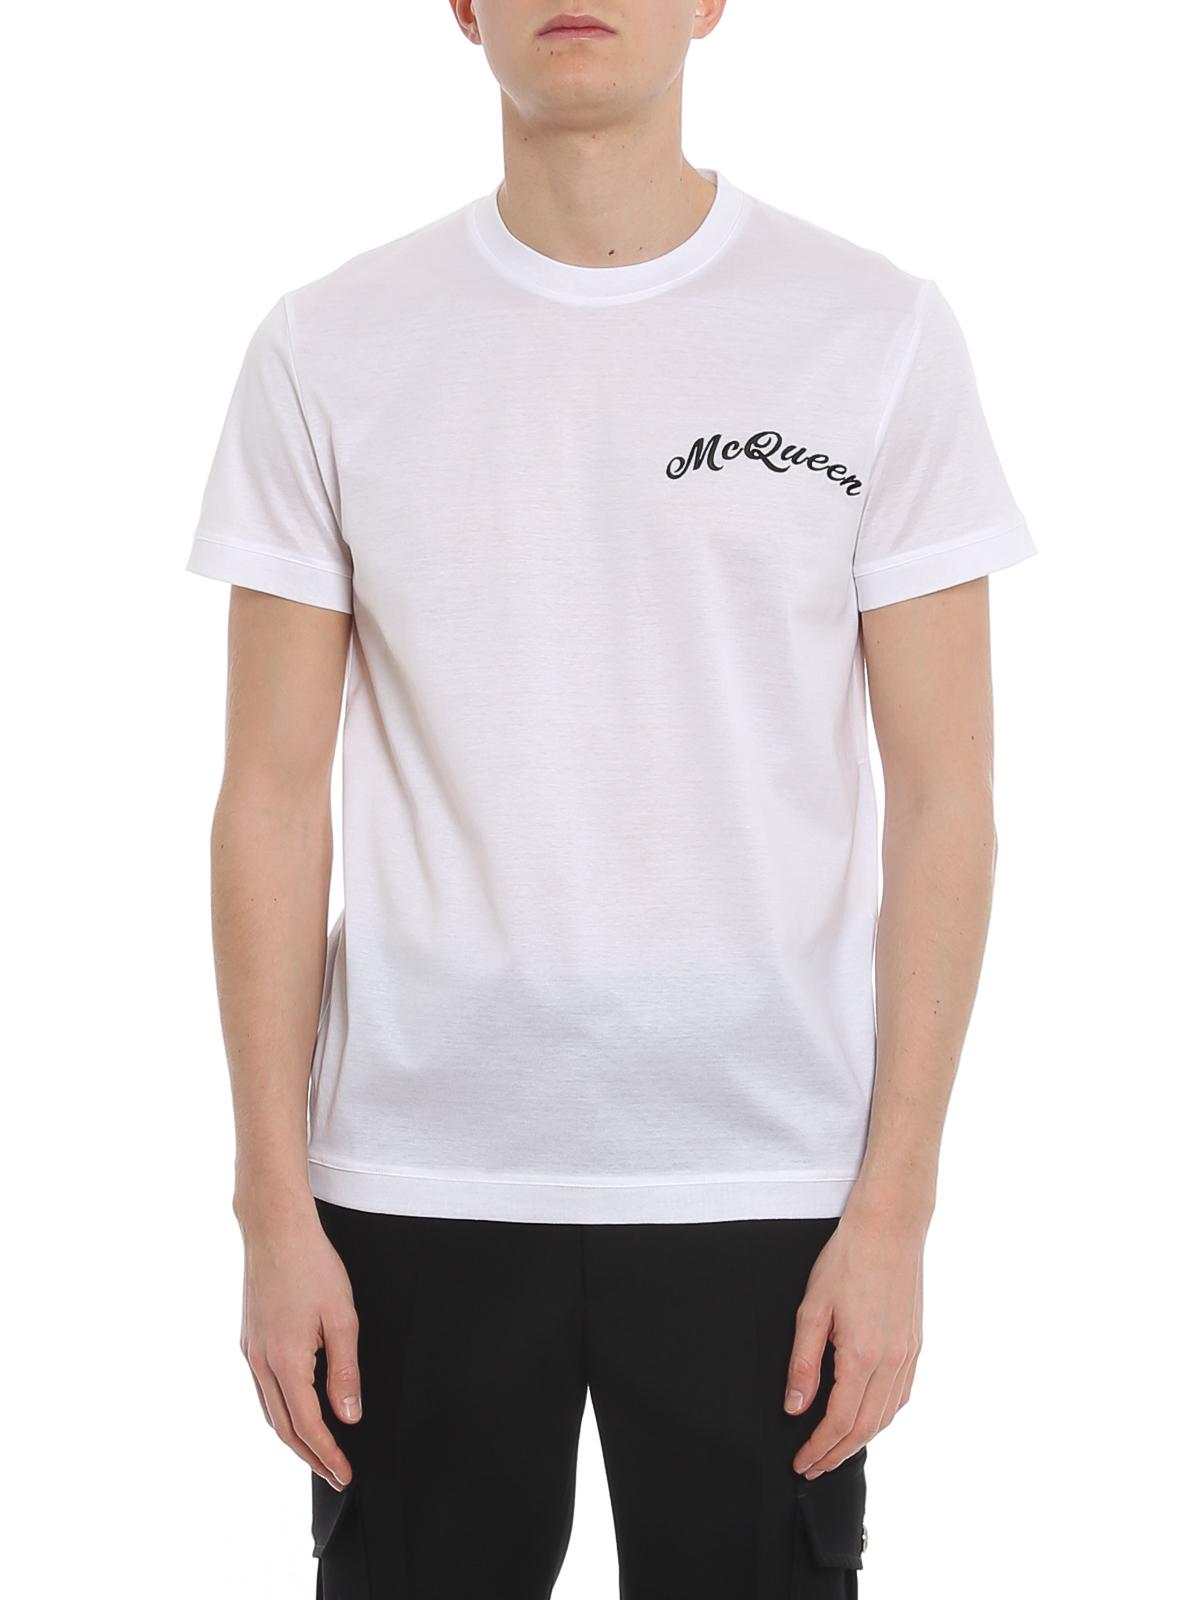 Alexander McQueen Embroidered Cotton T-shirt in White for Men - Lyst